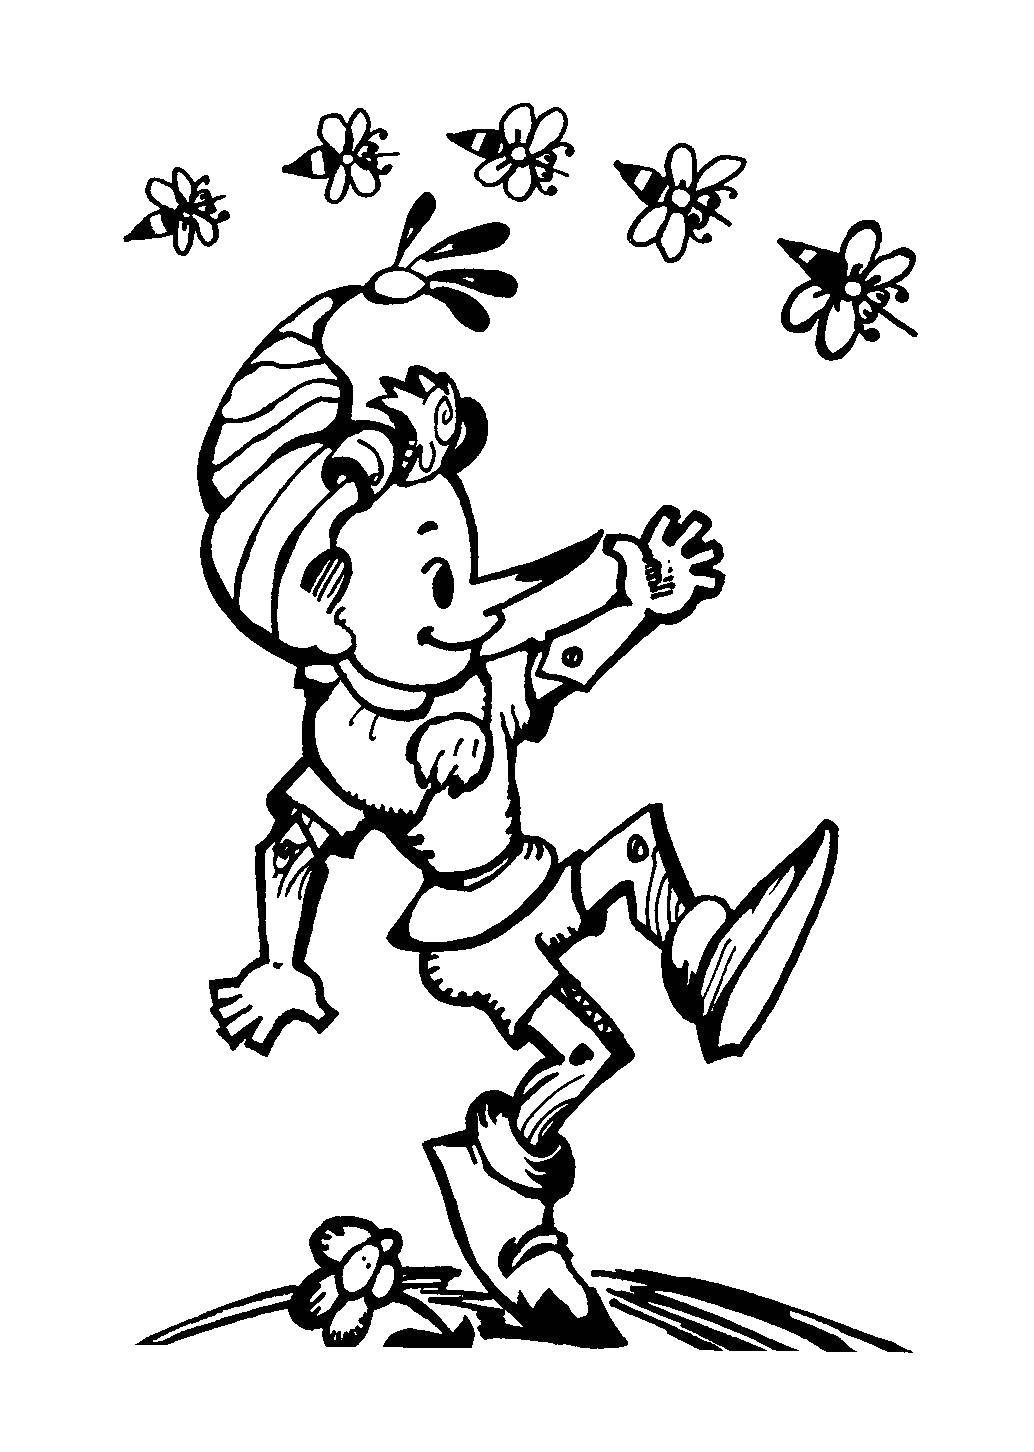 Coloring Pinocchio and the bees. Category Golden key. Tags:  Pinocchio , Golden Key, cartoon.